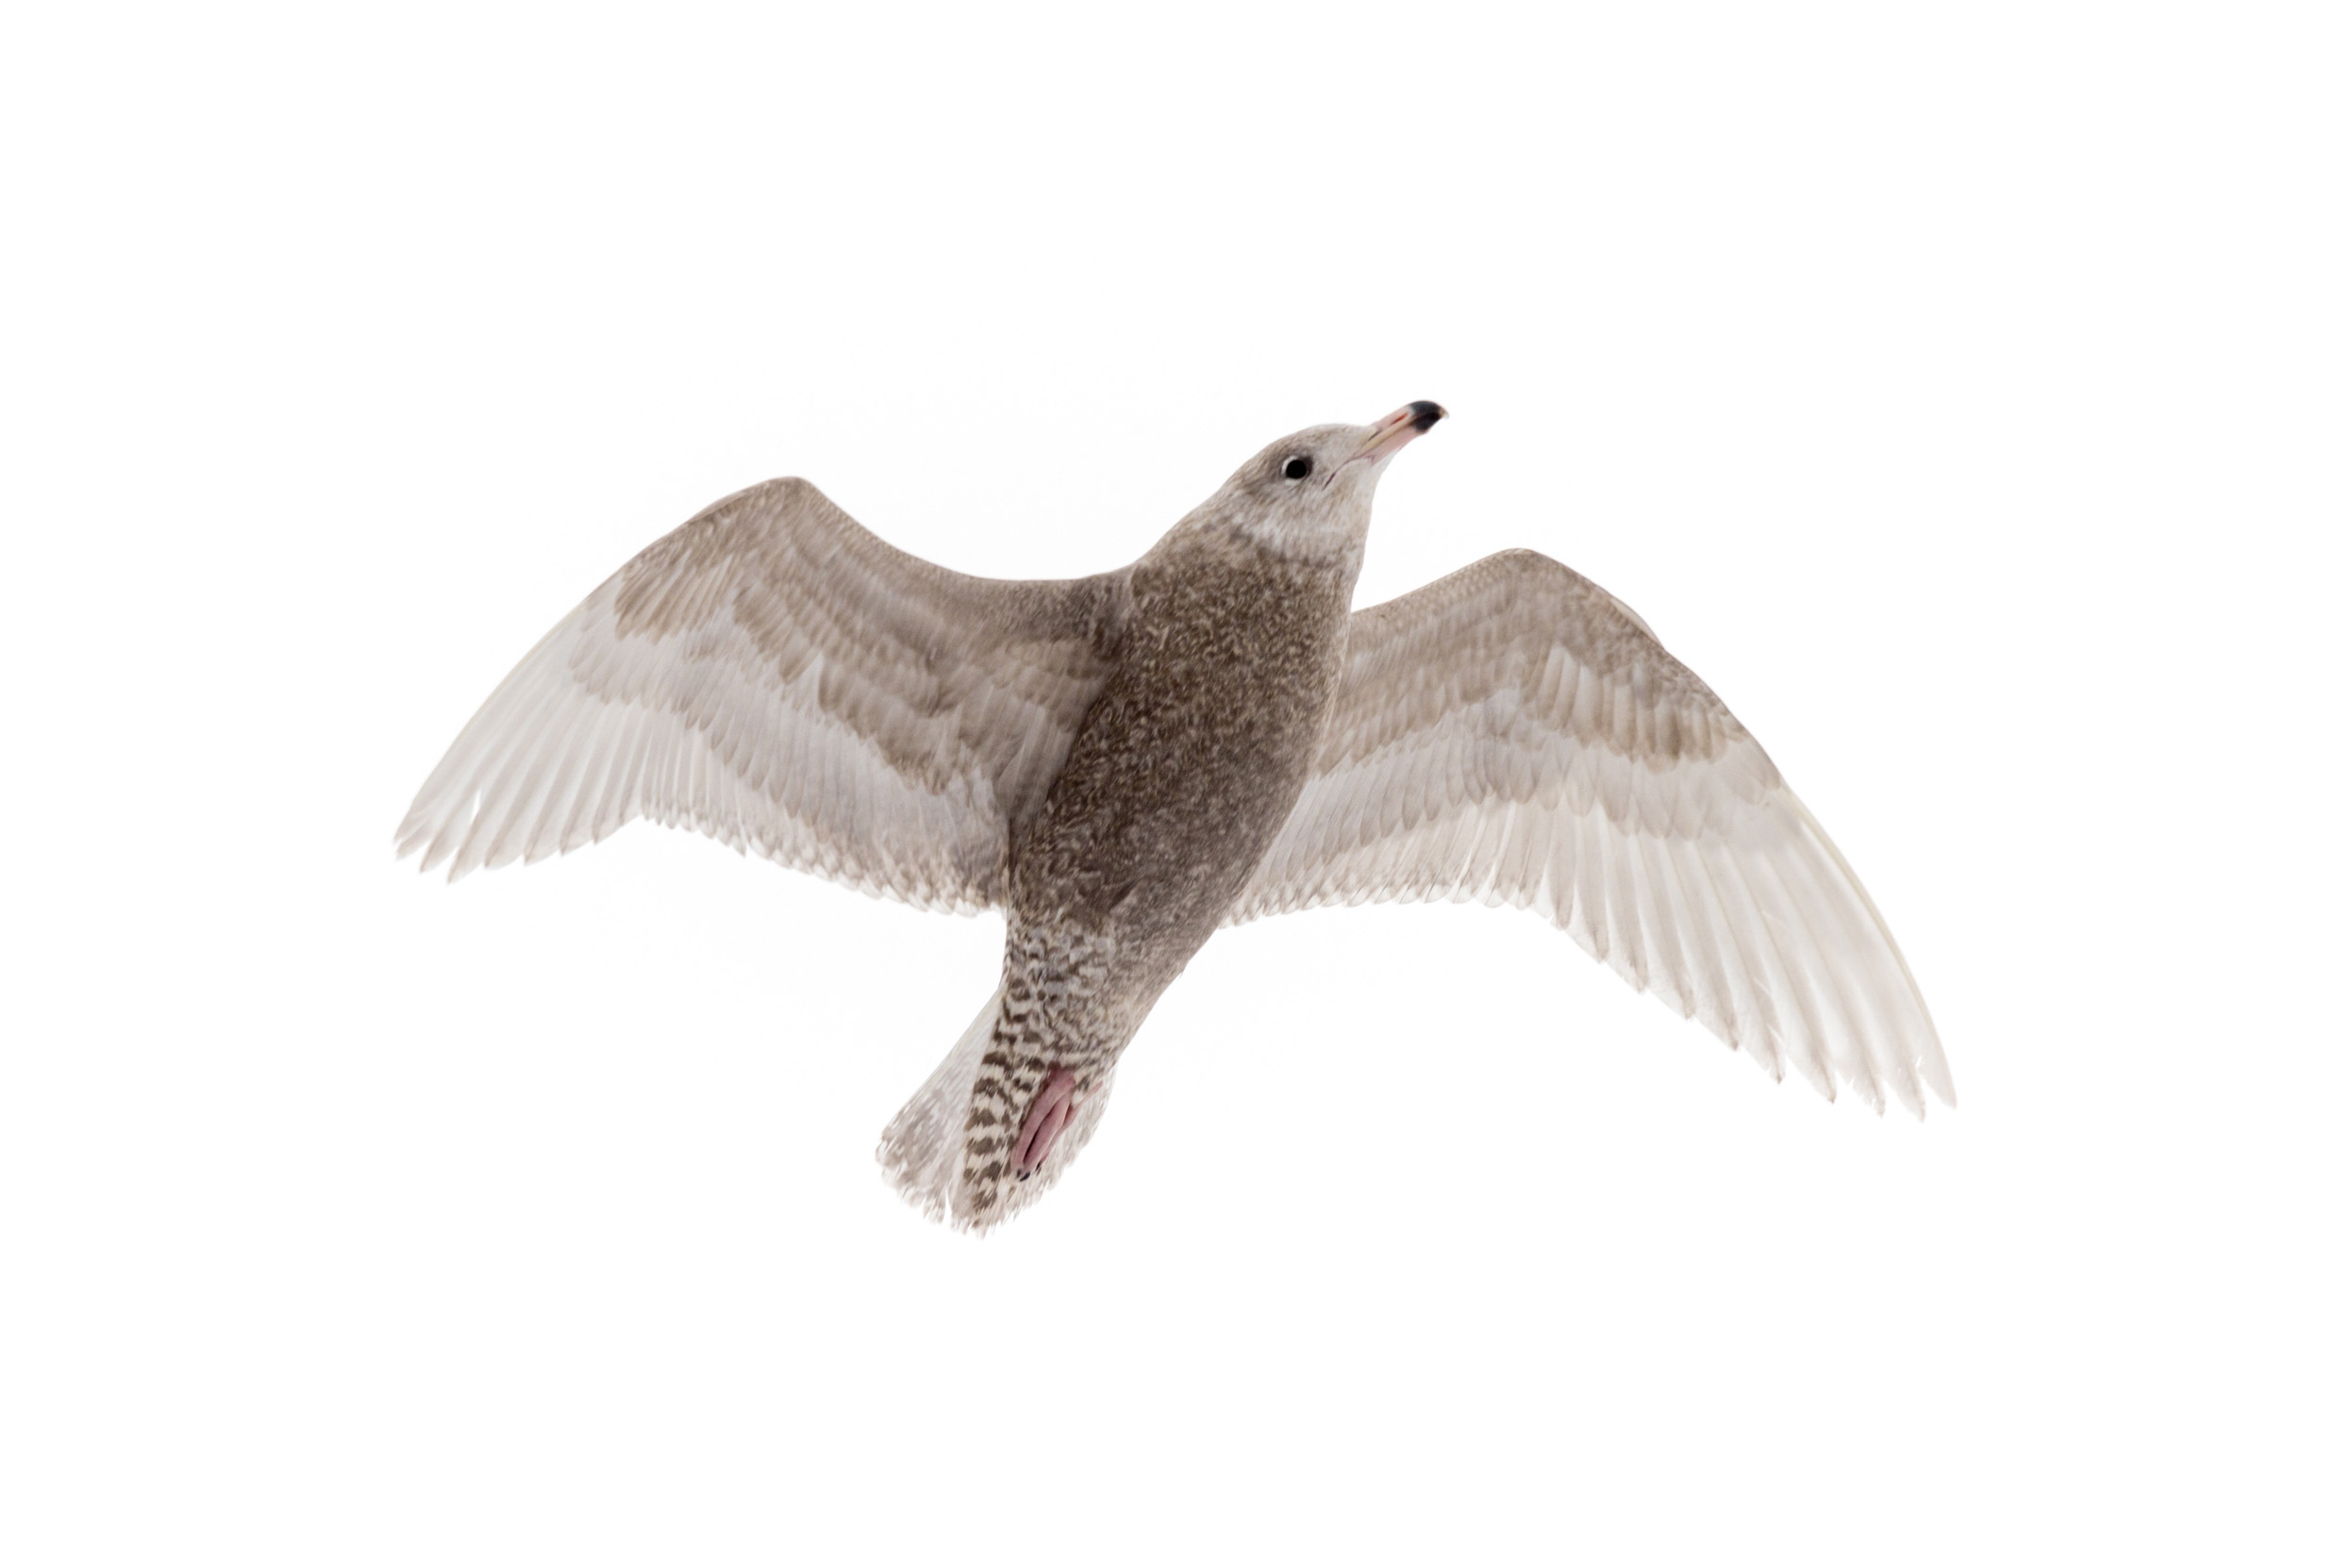 A lone juvenile Glaucous Gull flying overhead against a white background. 